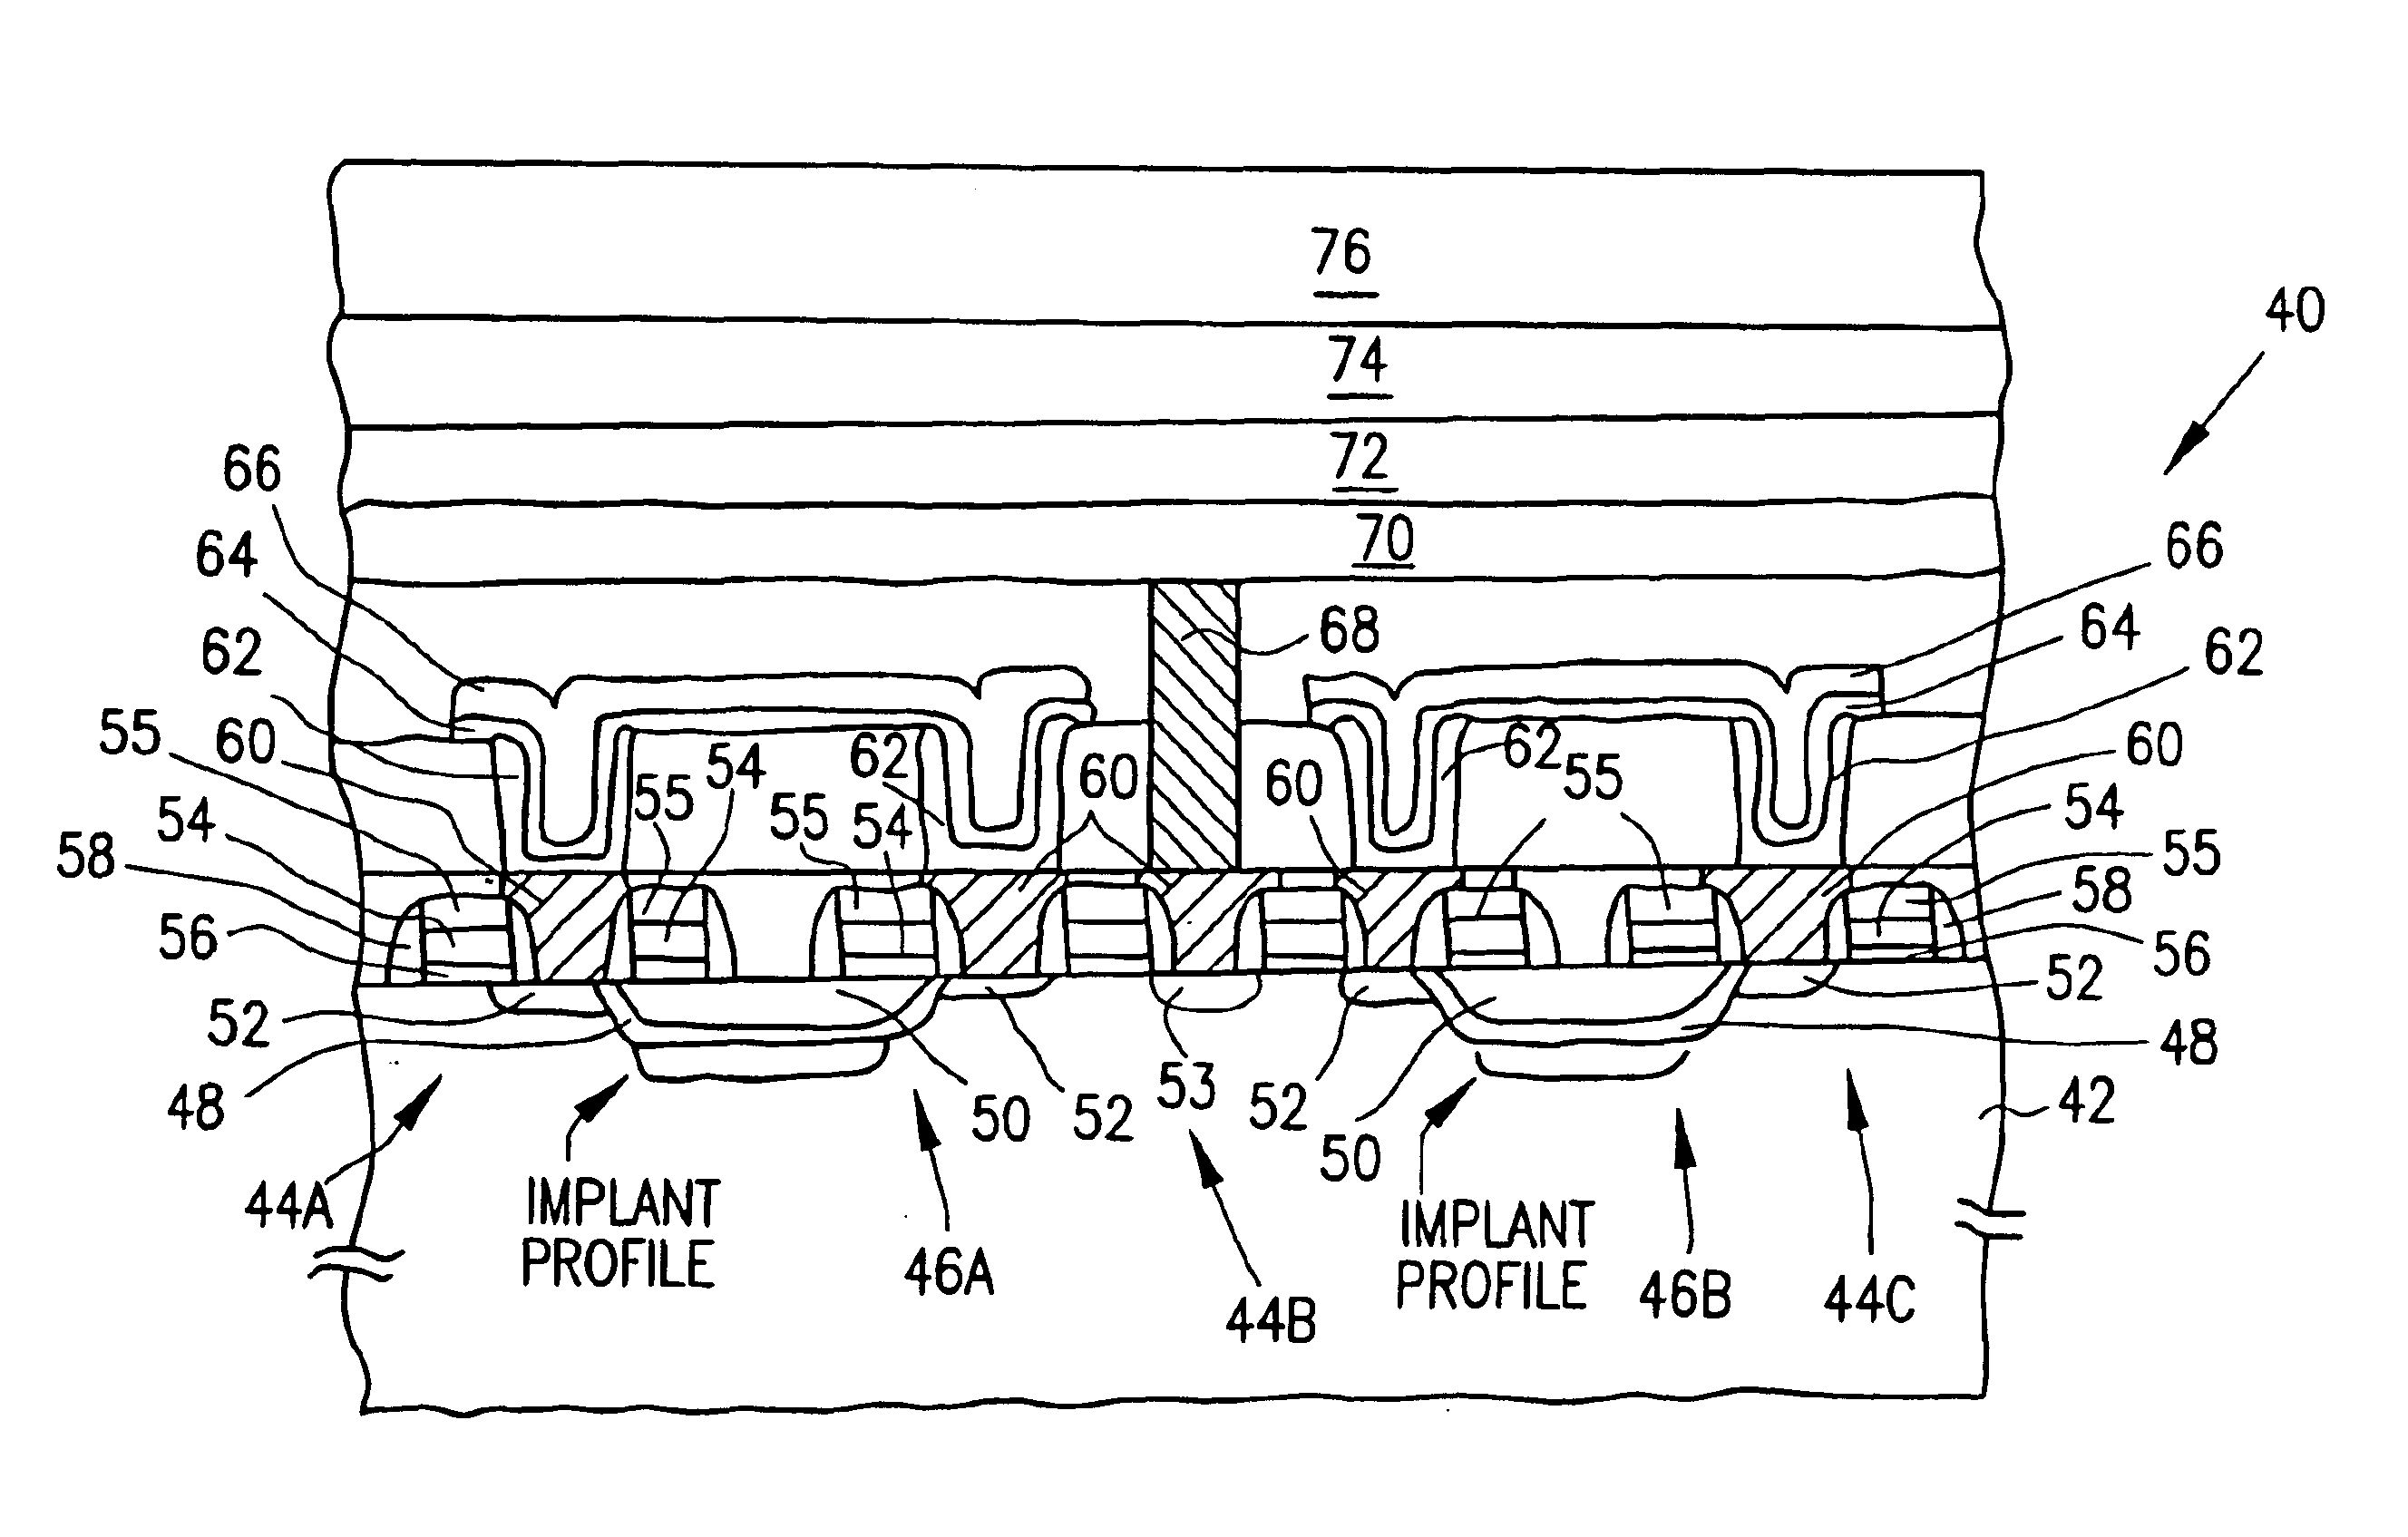 Trench isolation for semiconductor devices